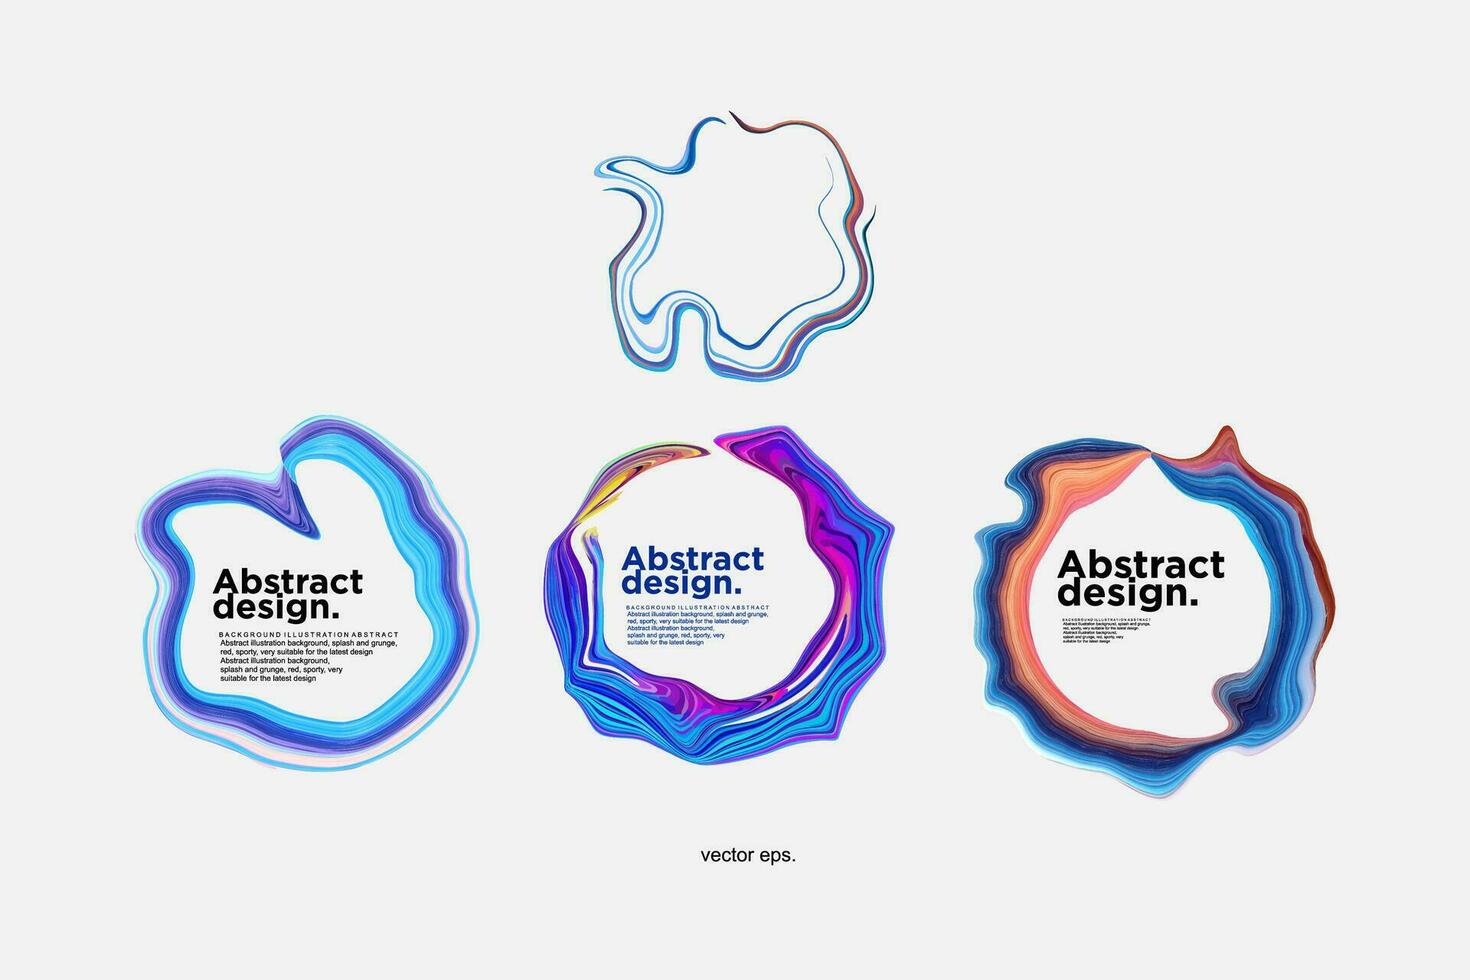 abstract design elements set abstract design elements set abstract design elements set abstract design elements set abstract design vector